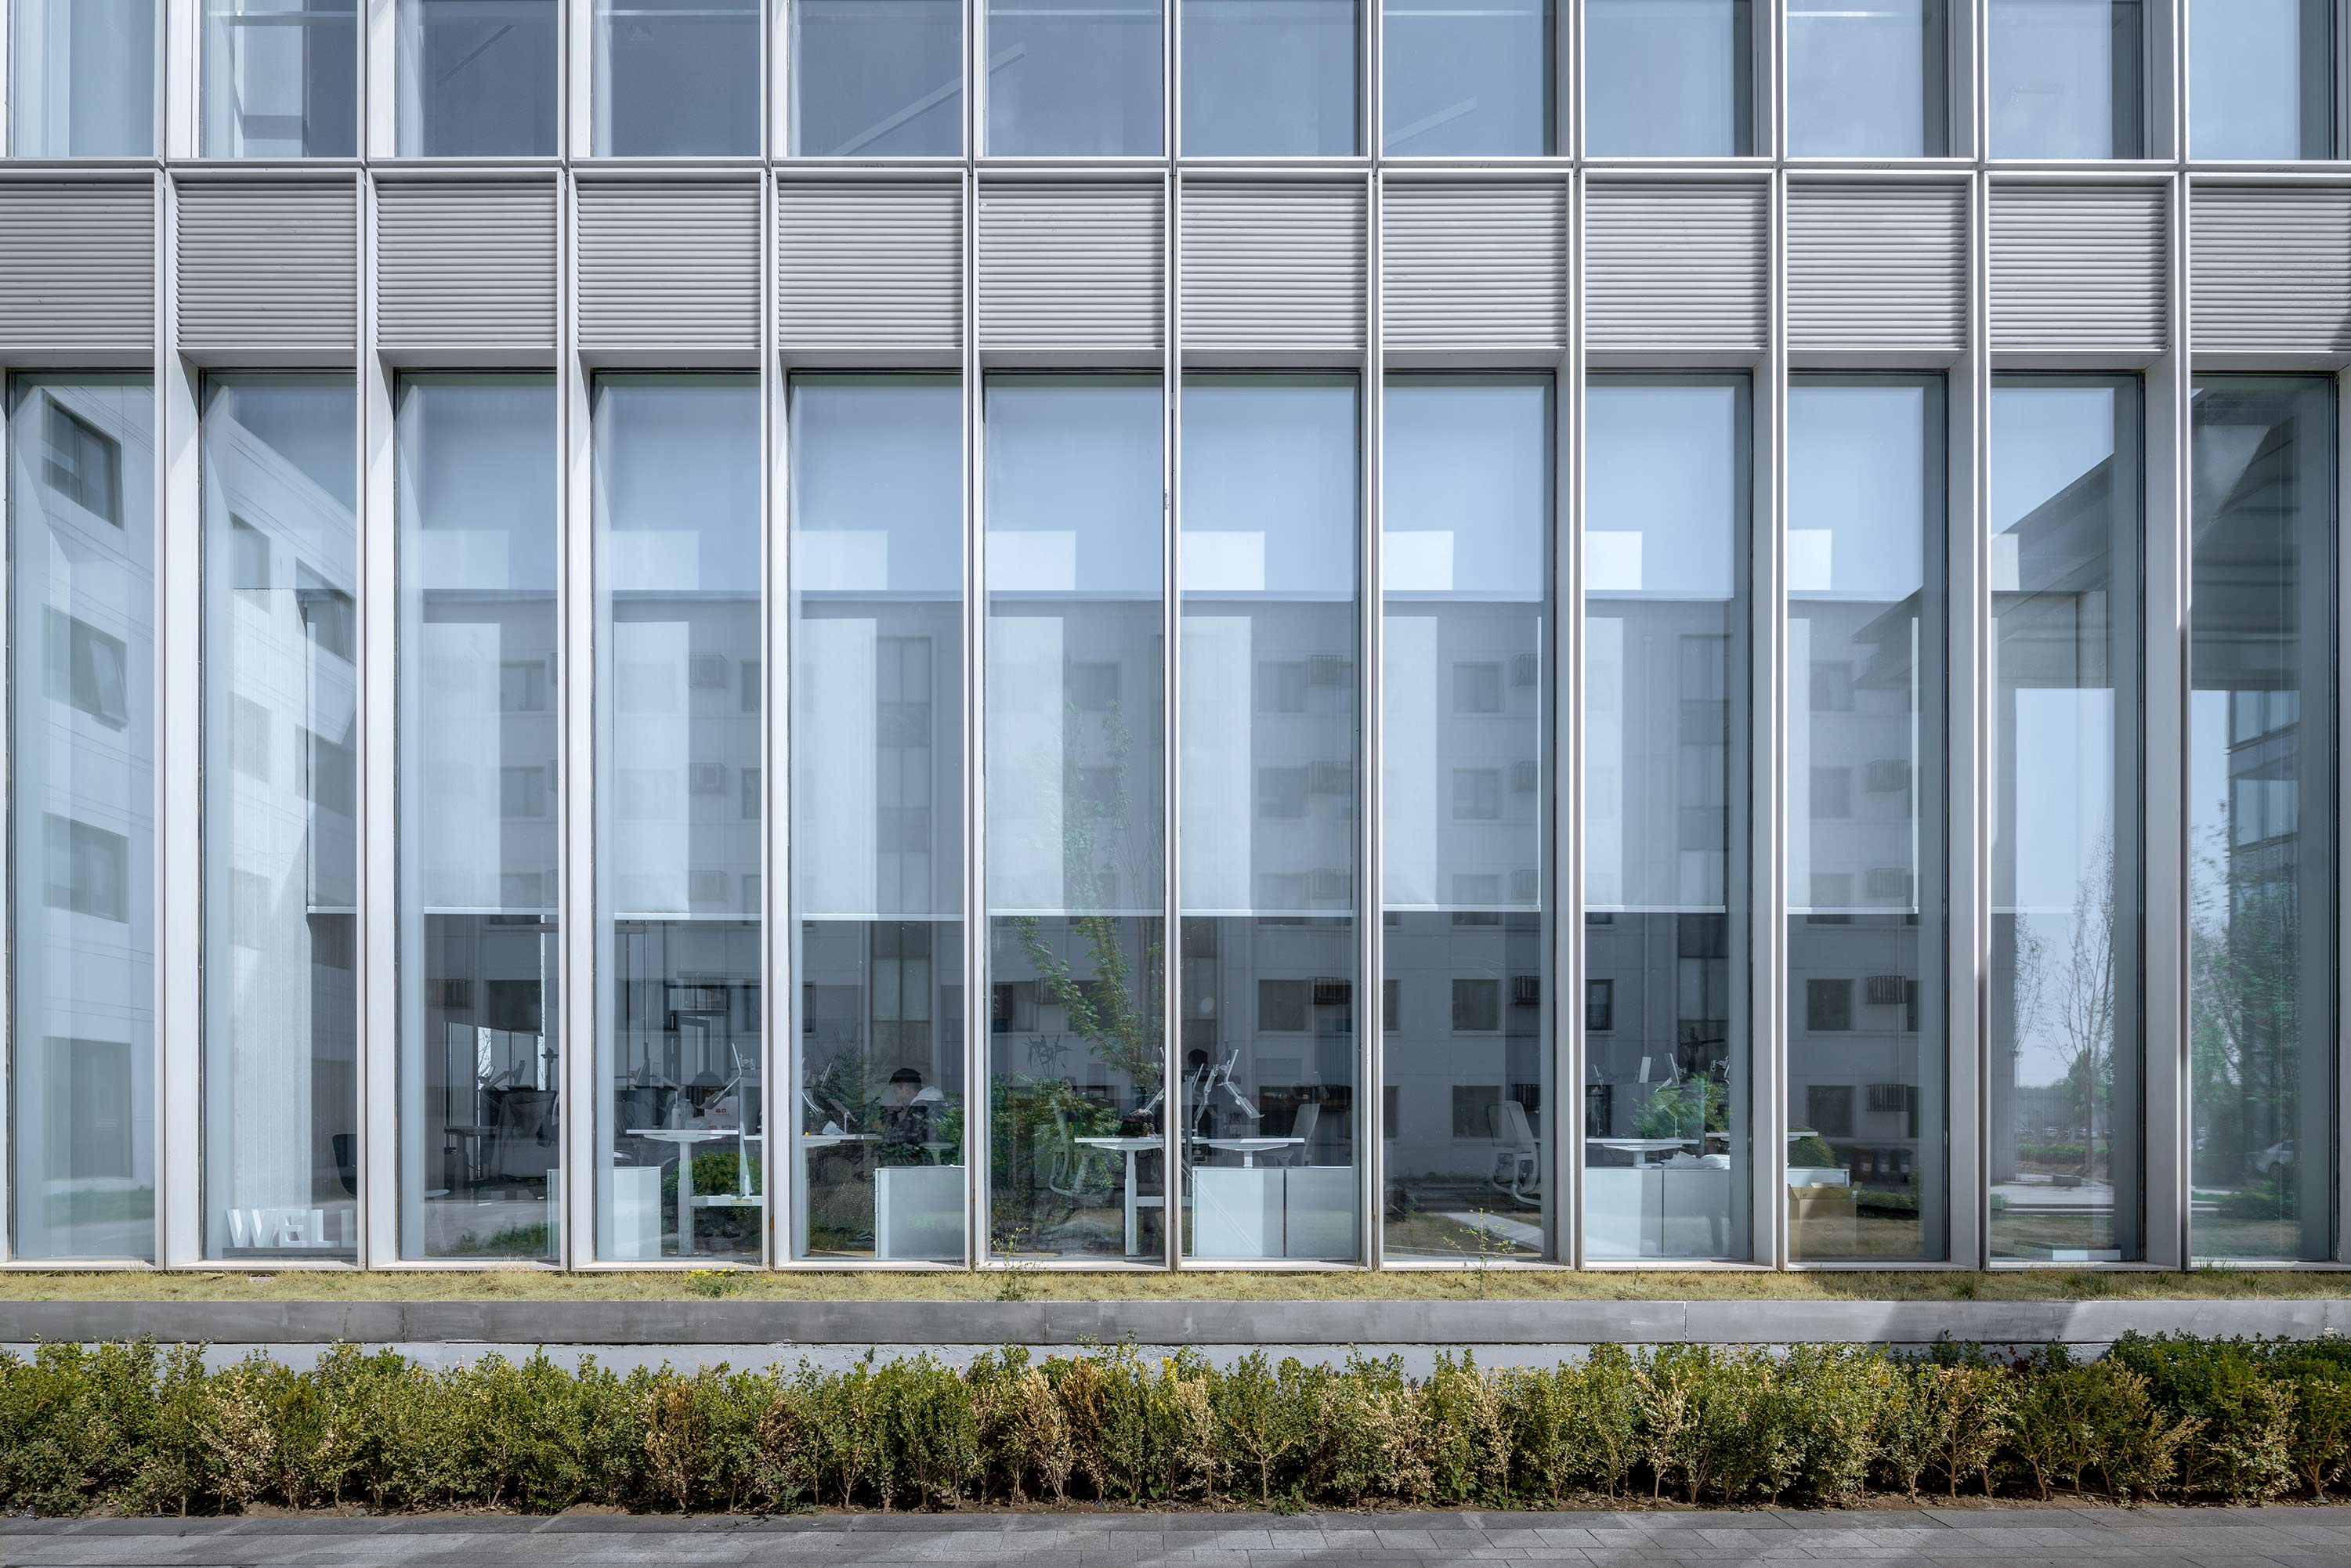 The facade of the building consists of an internal curtain structure, an external curtain, and electrochromic glass